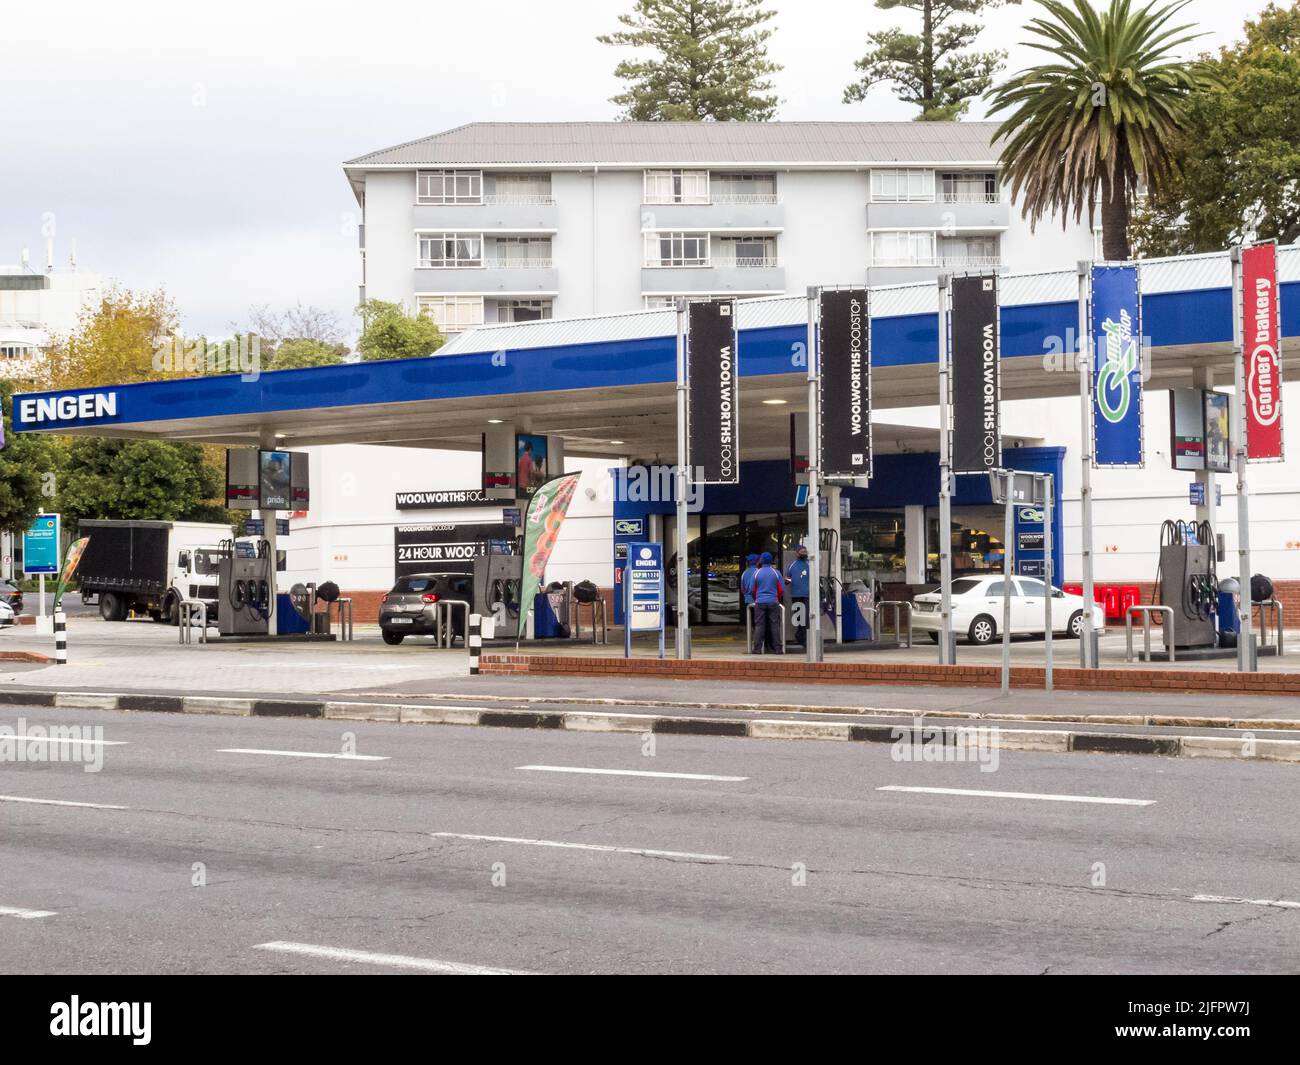 Engen garage forecourt in urban residential area of Cape Town,South Africa showing employees or petrol attendants Stock Photo